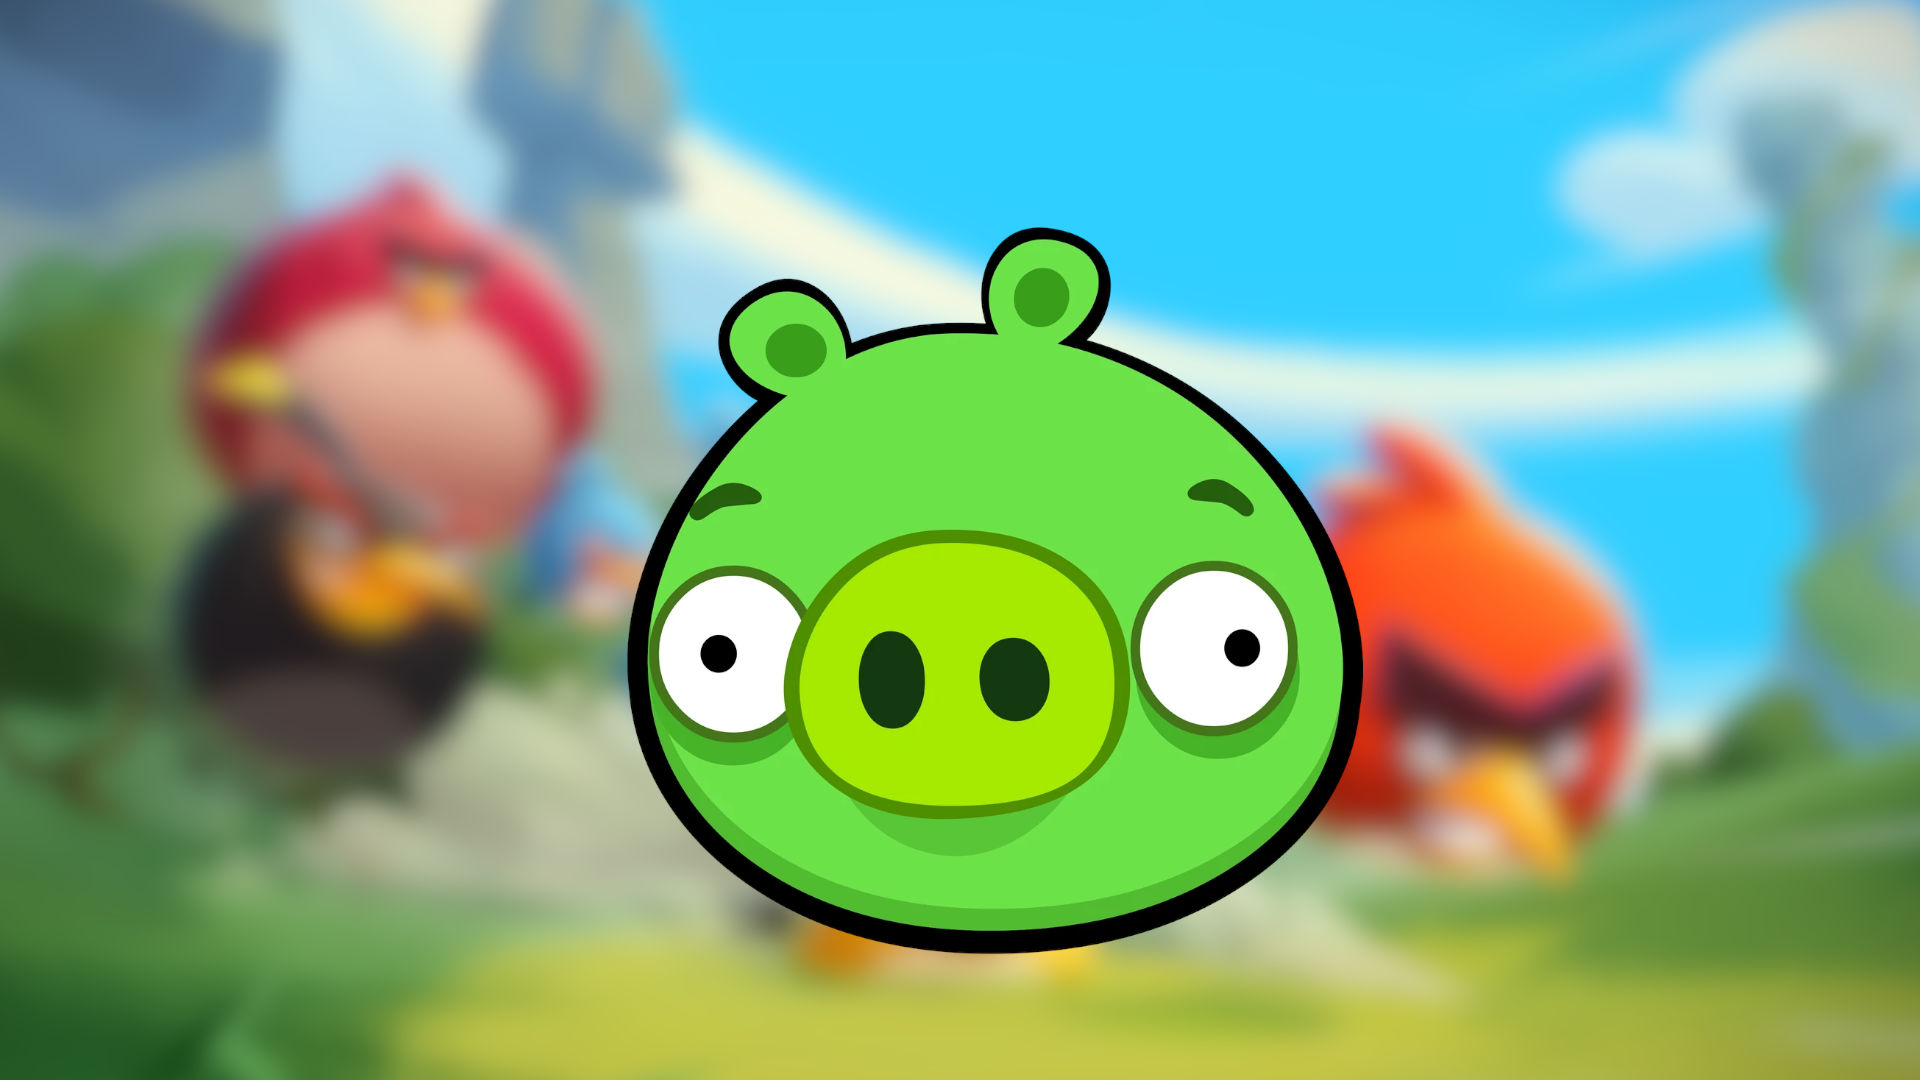 Le personnage d'Angry Birds, Ross